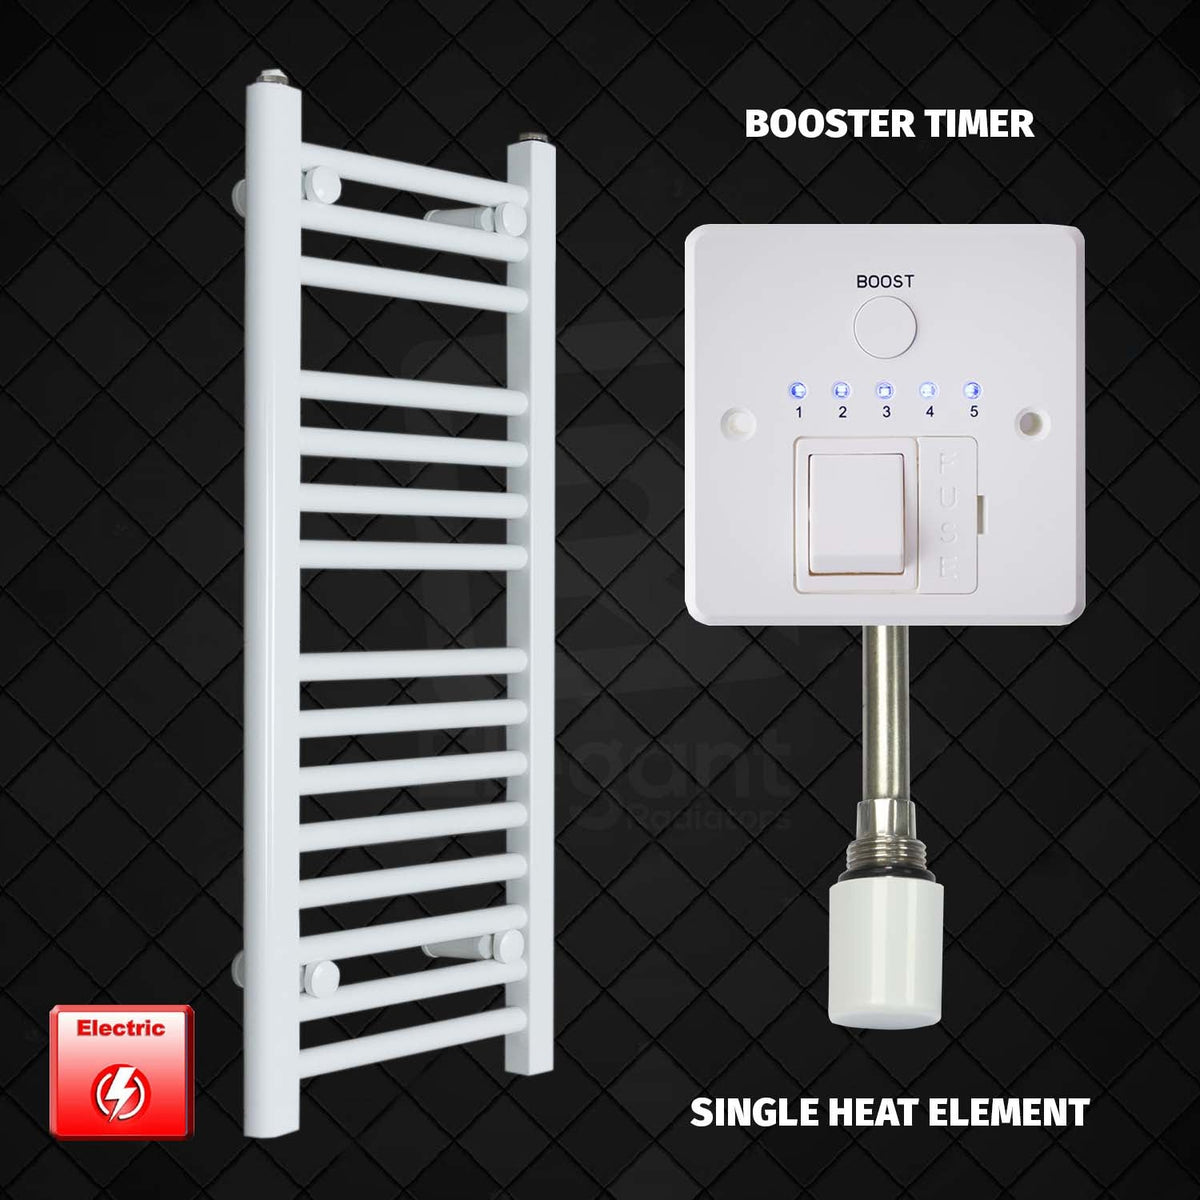 800 x 300 Pre-Filled Electric Heated Towel Rail Radiator White HTR Booster Timer Single Heat Element